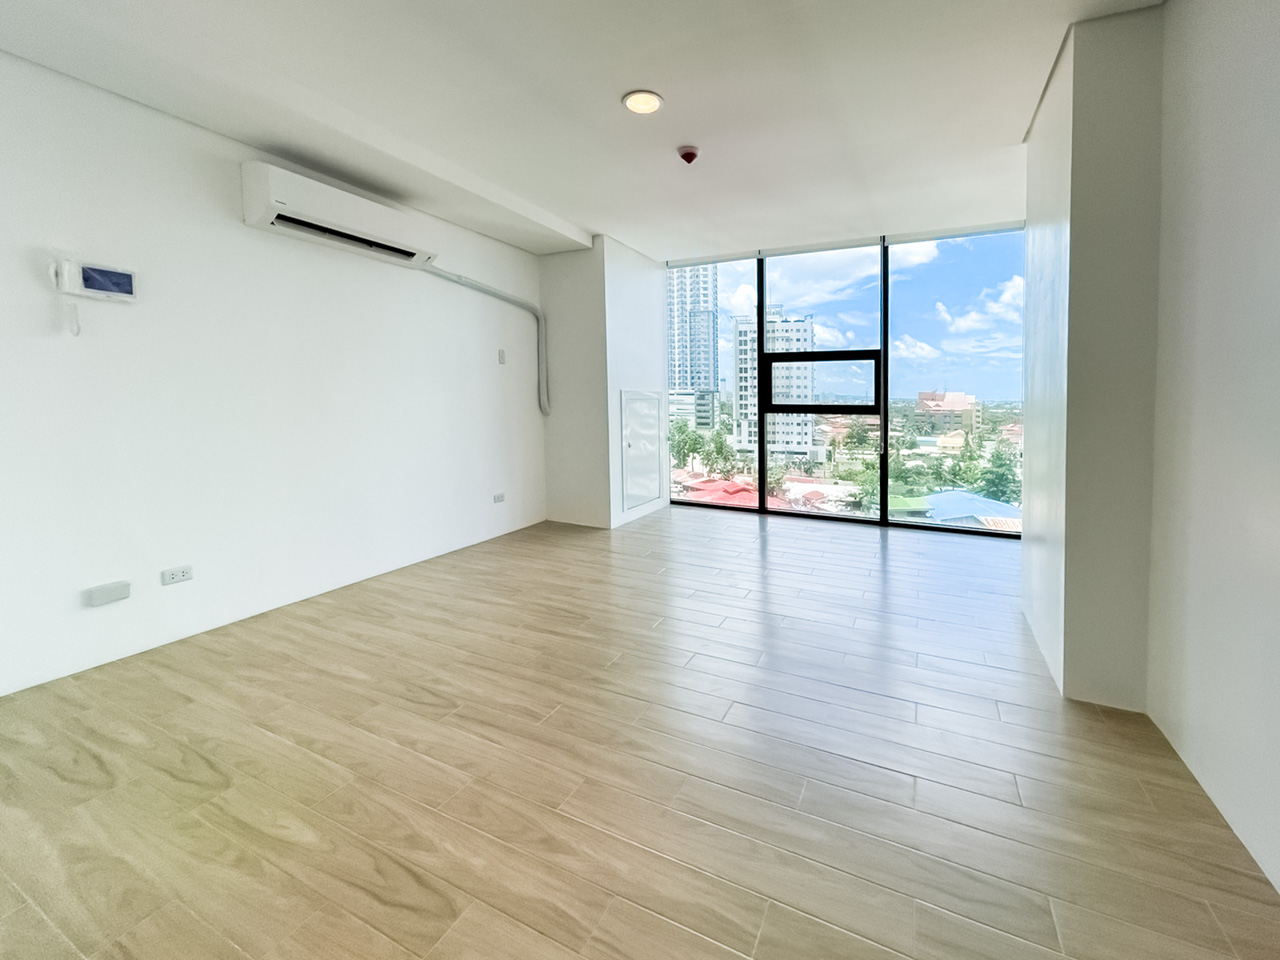 RCPTM1 Brand New Office Residential Space for Rent in Cebu - 9